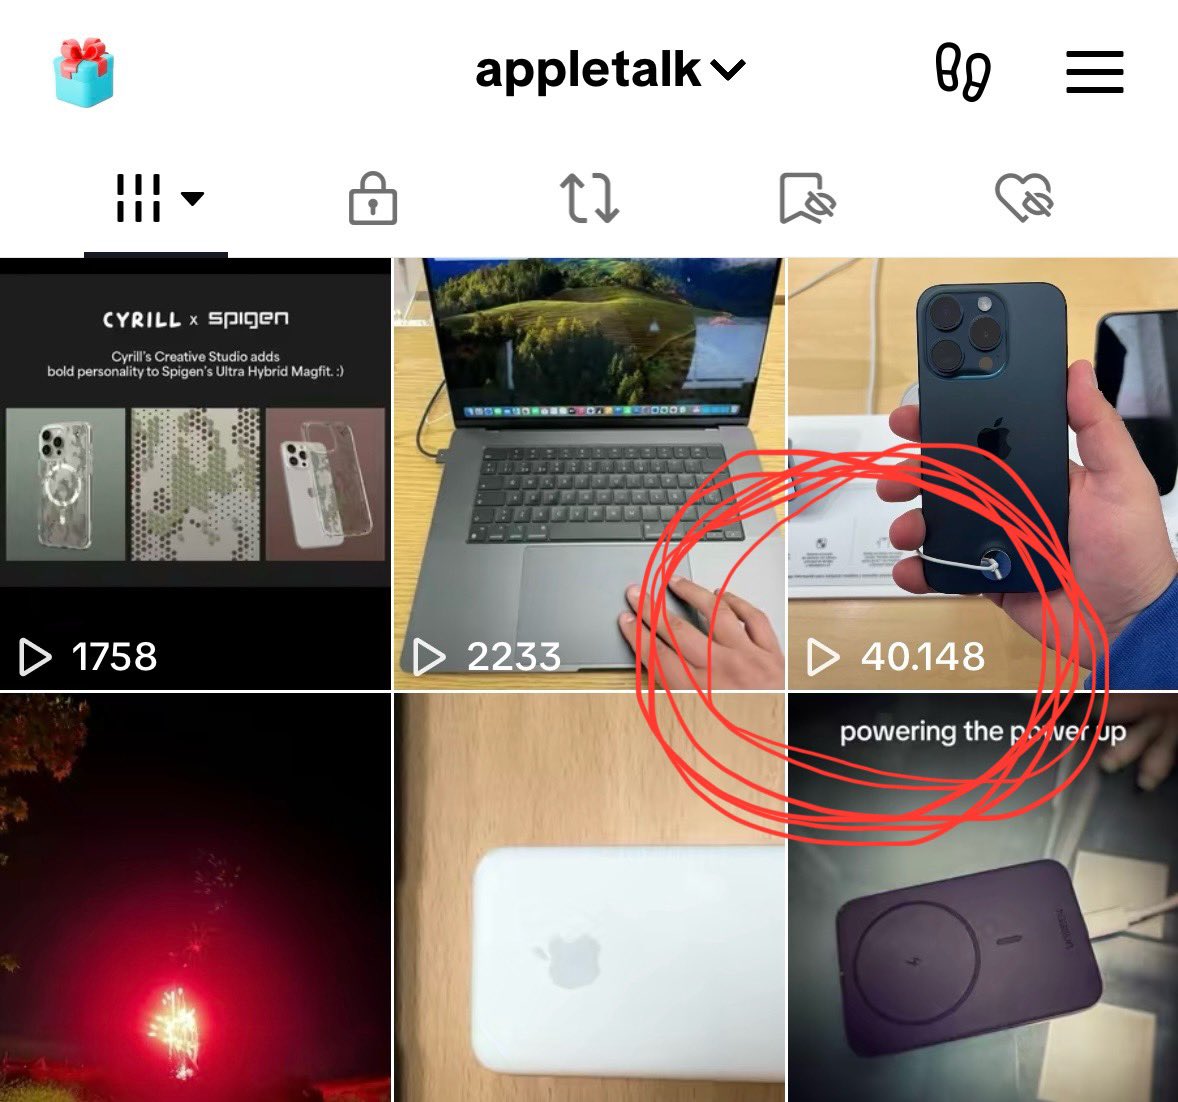 only 13 days after my other post, TIKTOK has shown how better they are to make people discover your content, still waiting for X to do the same🤦🏼‍♂️ 40k views (10k more in 13days) #x #TikTok収益化  #AchievementUnlocked